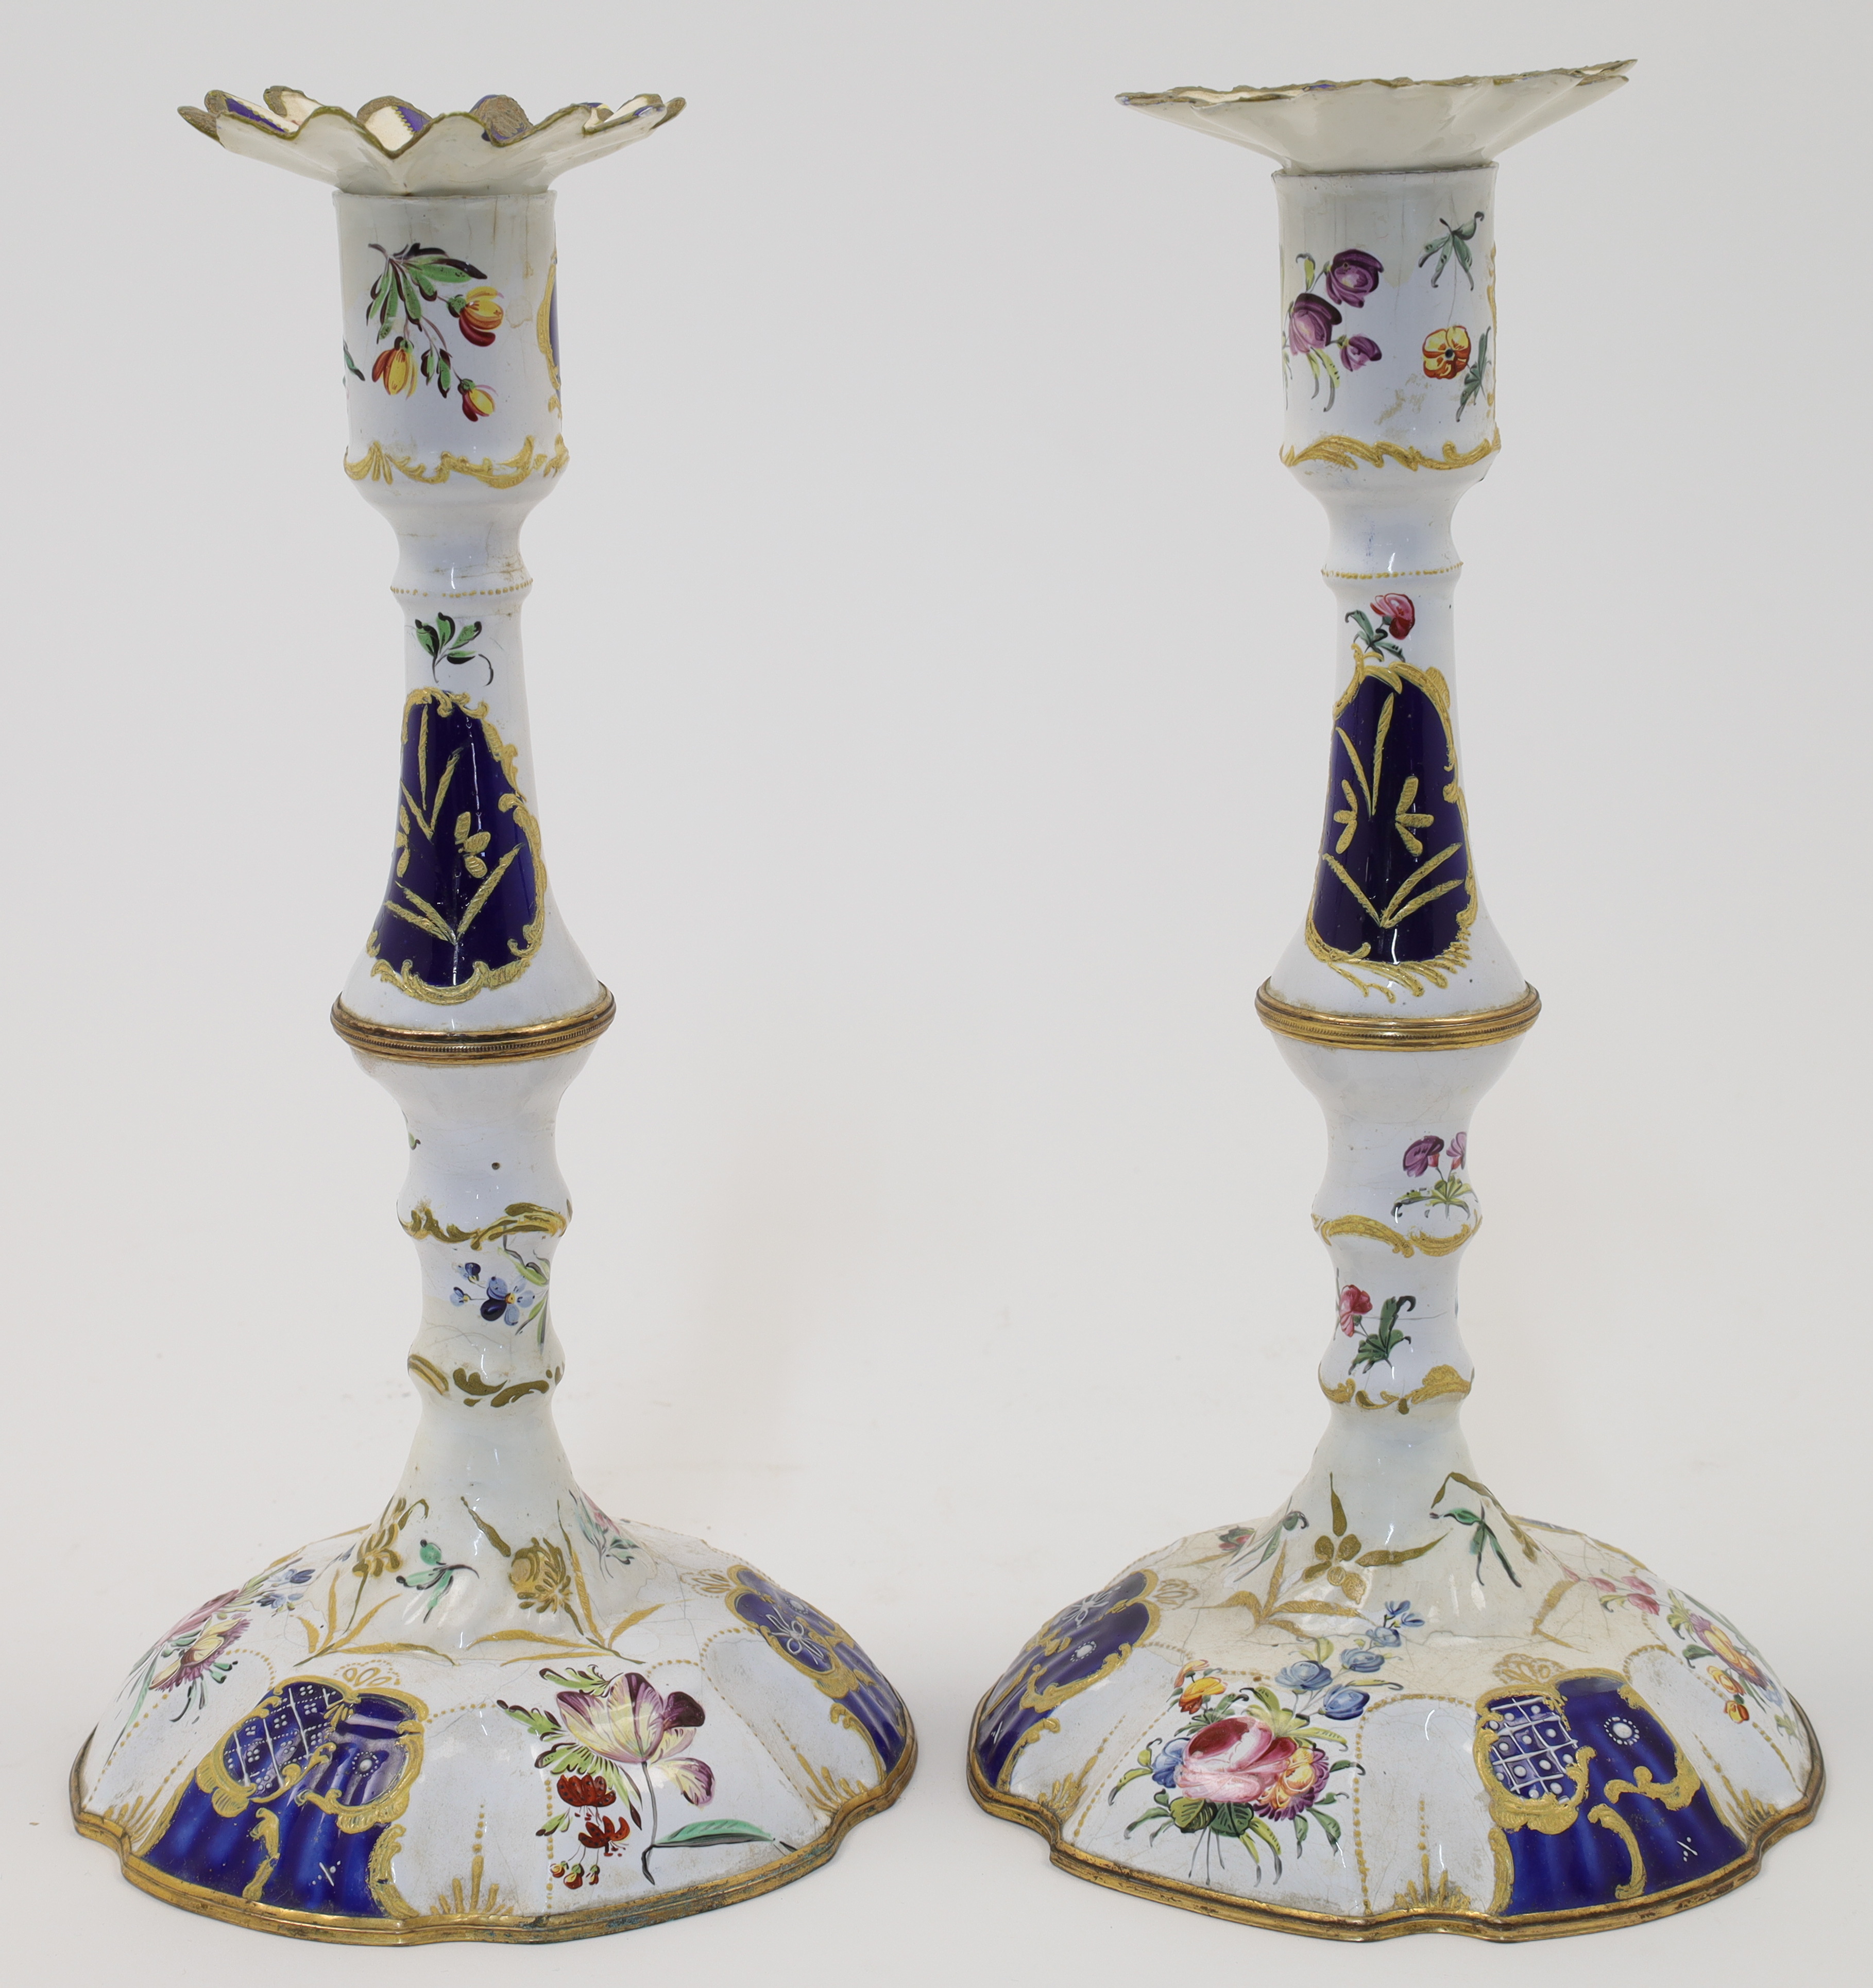 WITHDRAWN A pair of Staffordshire enamelled candlesticks, 19th century, the stem of baluster form